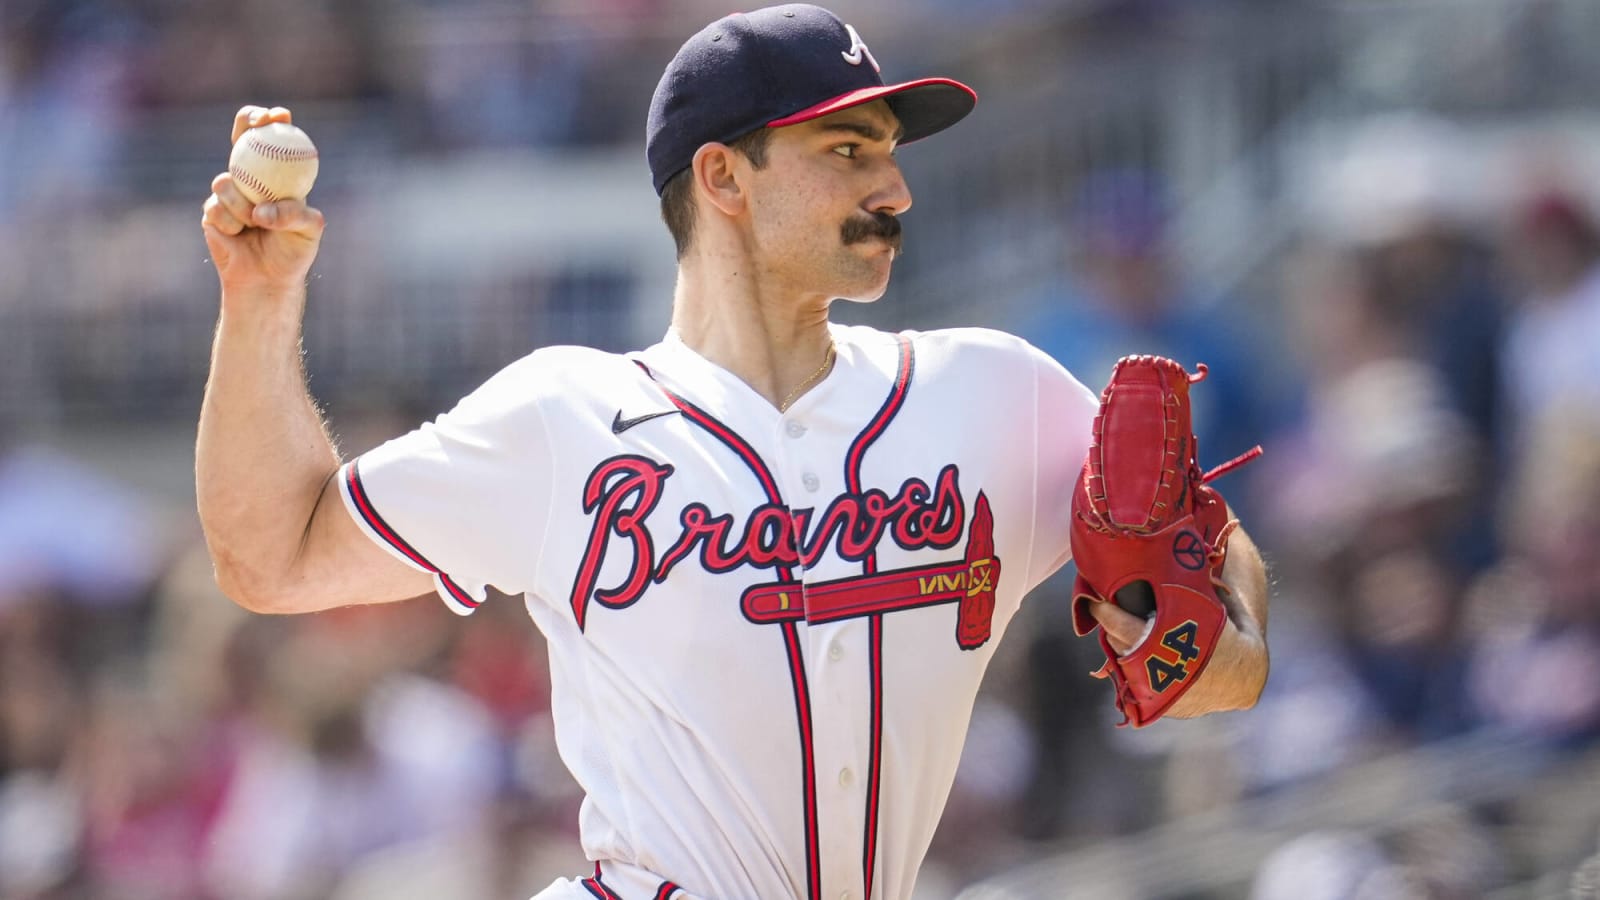 Atlanta Braves: Why Max Fried Will Win the NL Cy Young in 2022